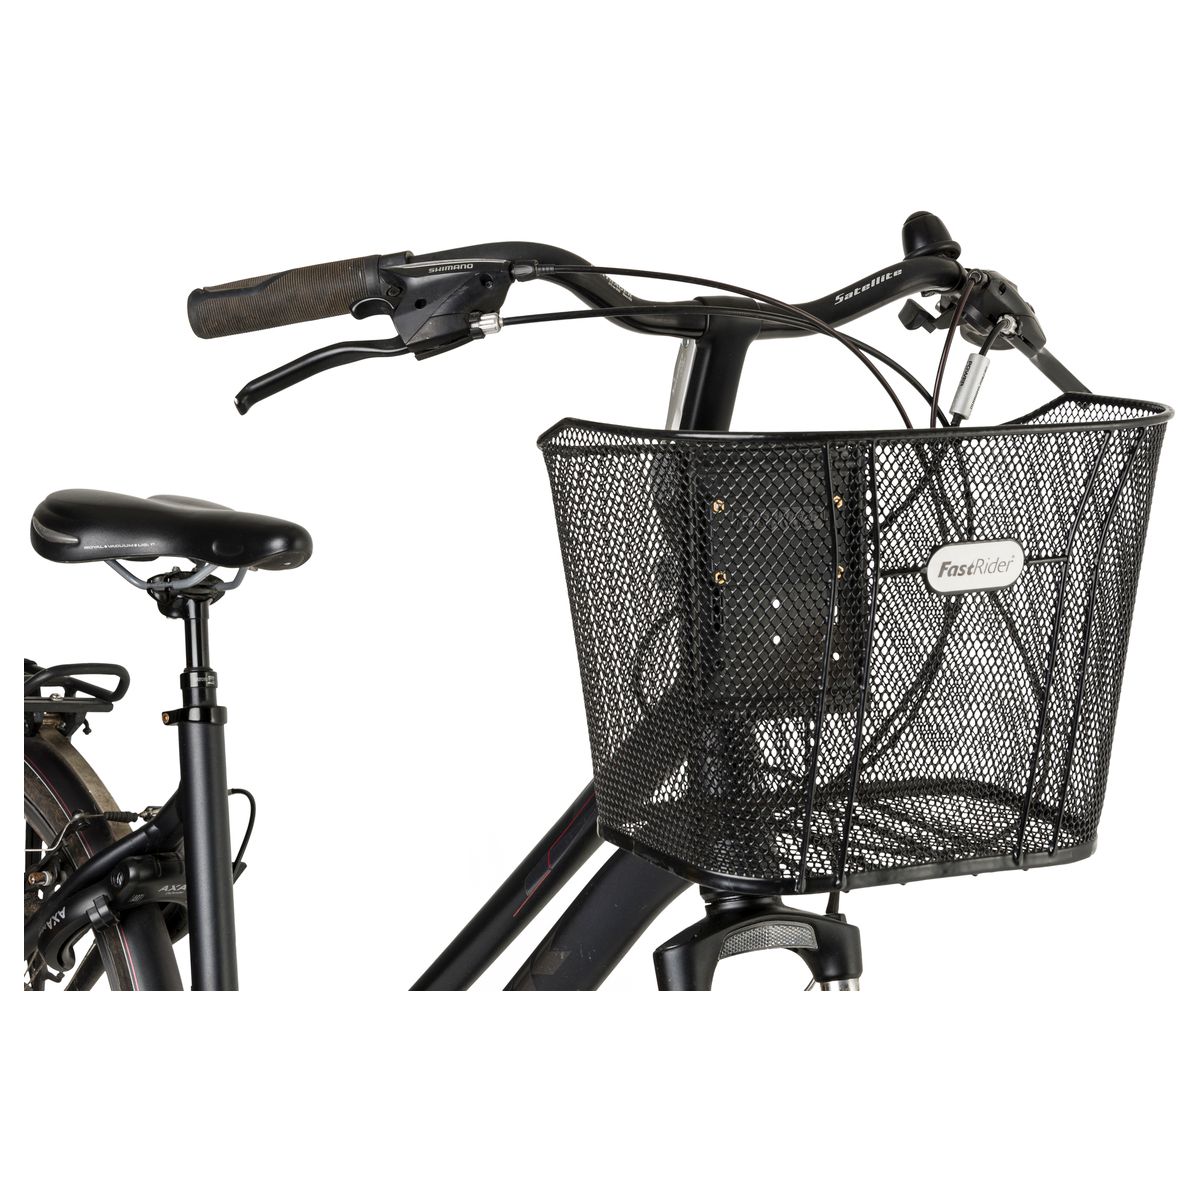 Fastrider Betuwe Bicycle basket Non-Detachable fit example